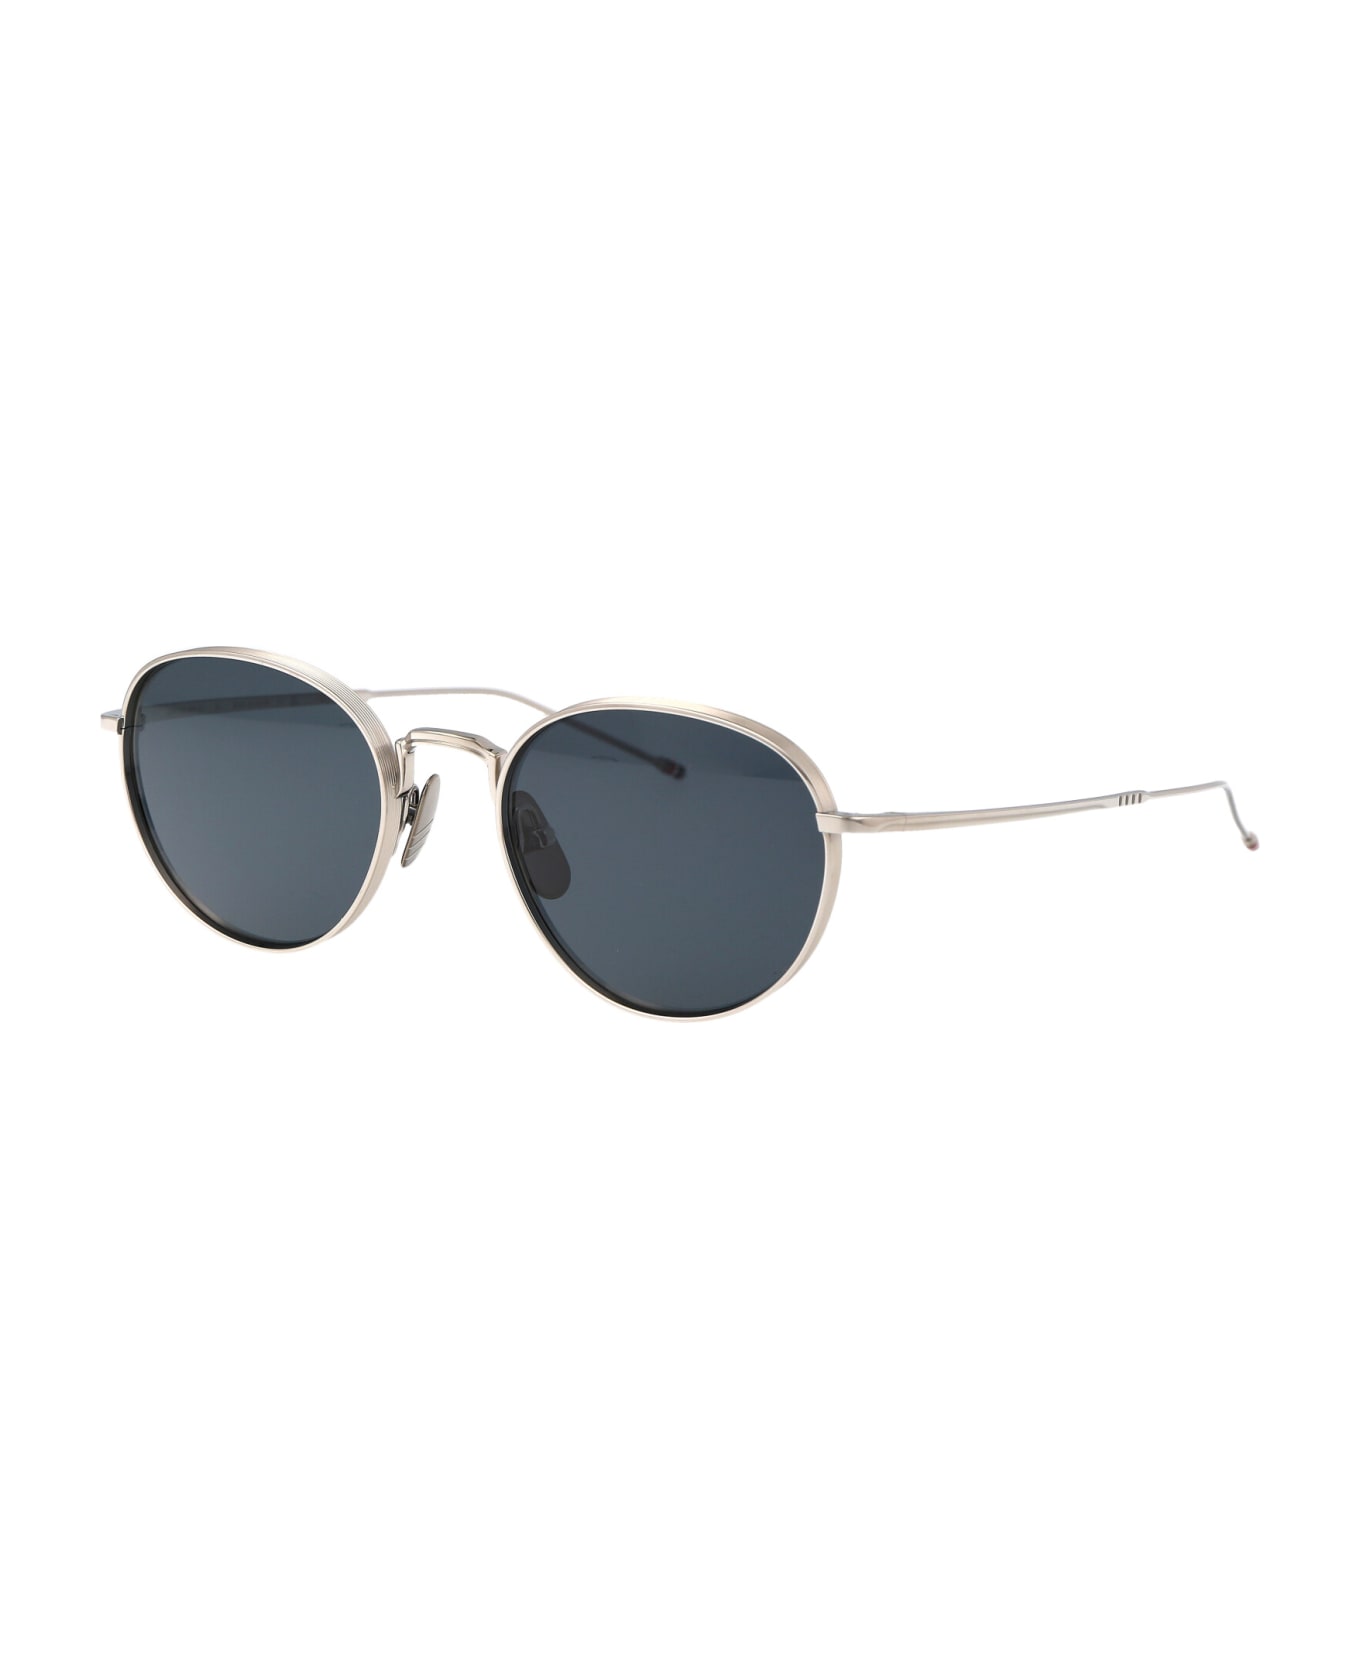 Thom Browne Ues119a-g0001-046-52 Sunglasses - 046 SILVER サングラス